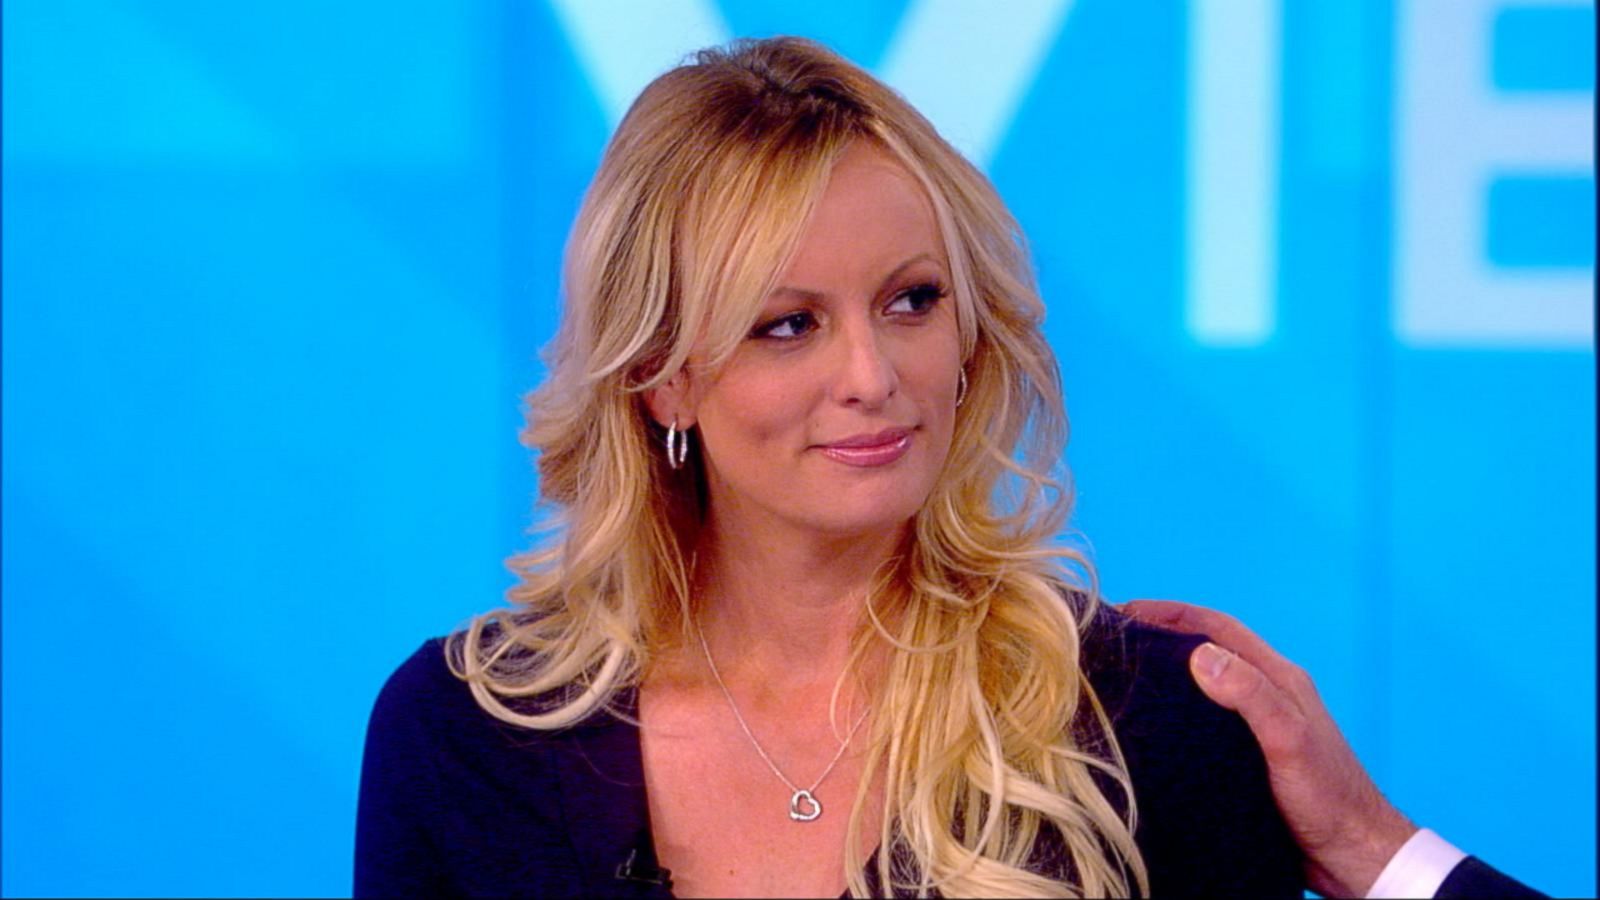 Is there a hidden meaning behind Stormy Daniels's key necklace?